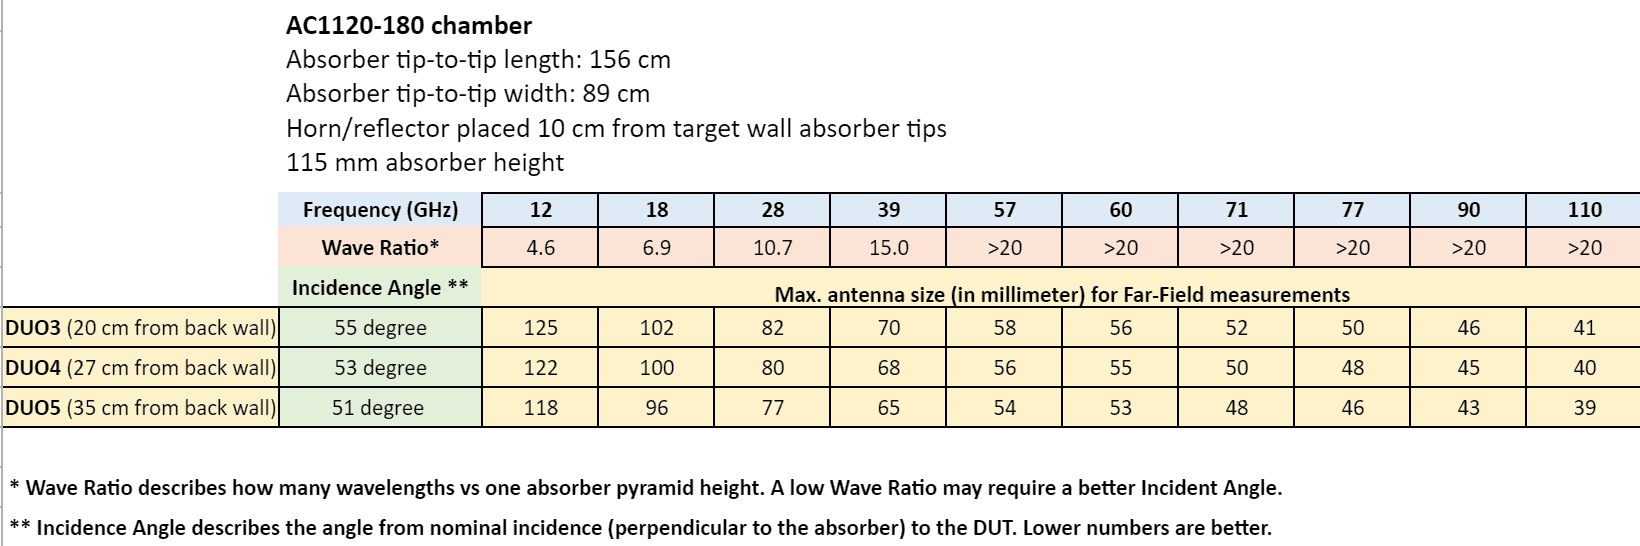 Far-field distances in the AC1120-180 mmWave Test chamber